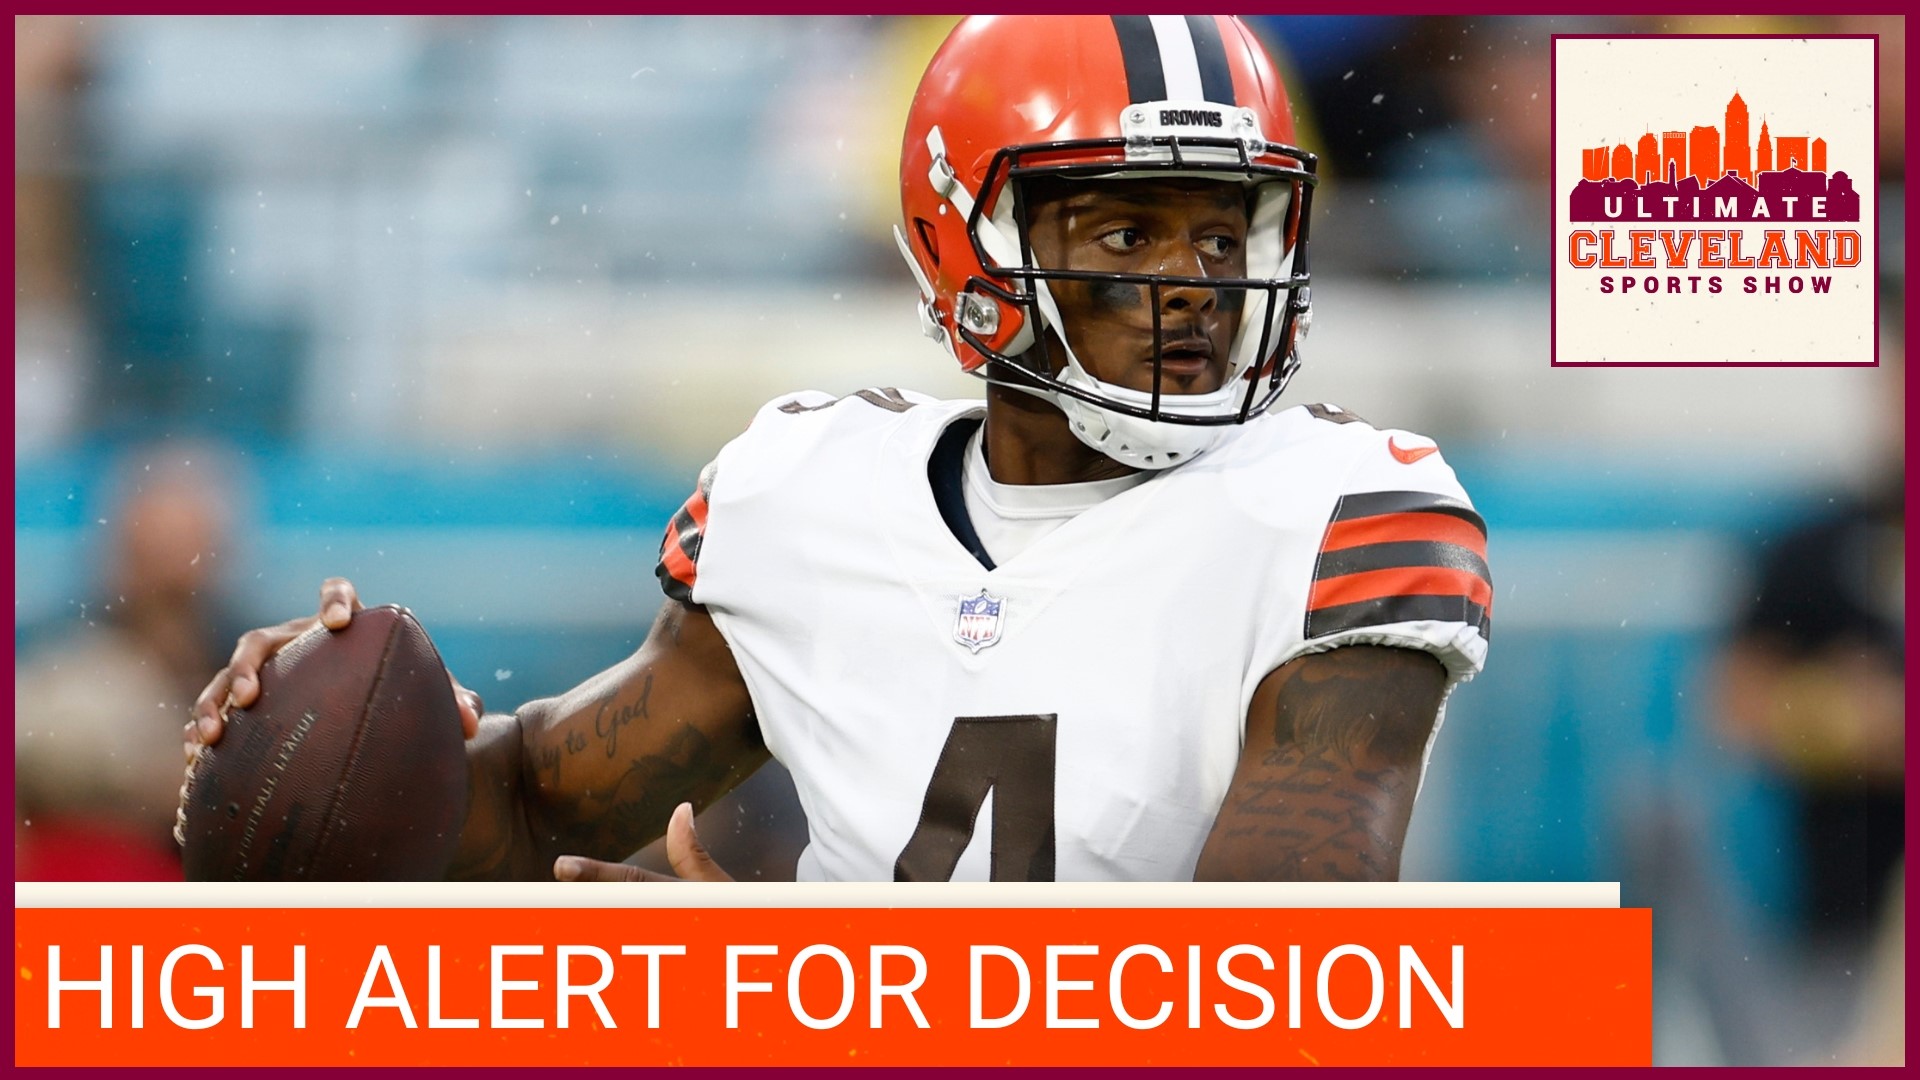 Deshaun Watson is still in limbo. The Cleveland Browns QB was suspended six games by Sue L. Robinson two weeks ago to the day and there's still no word on an appeal